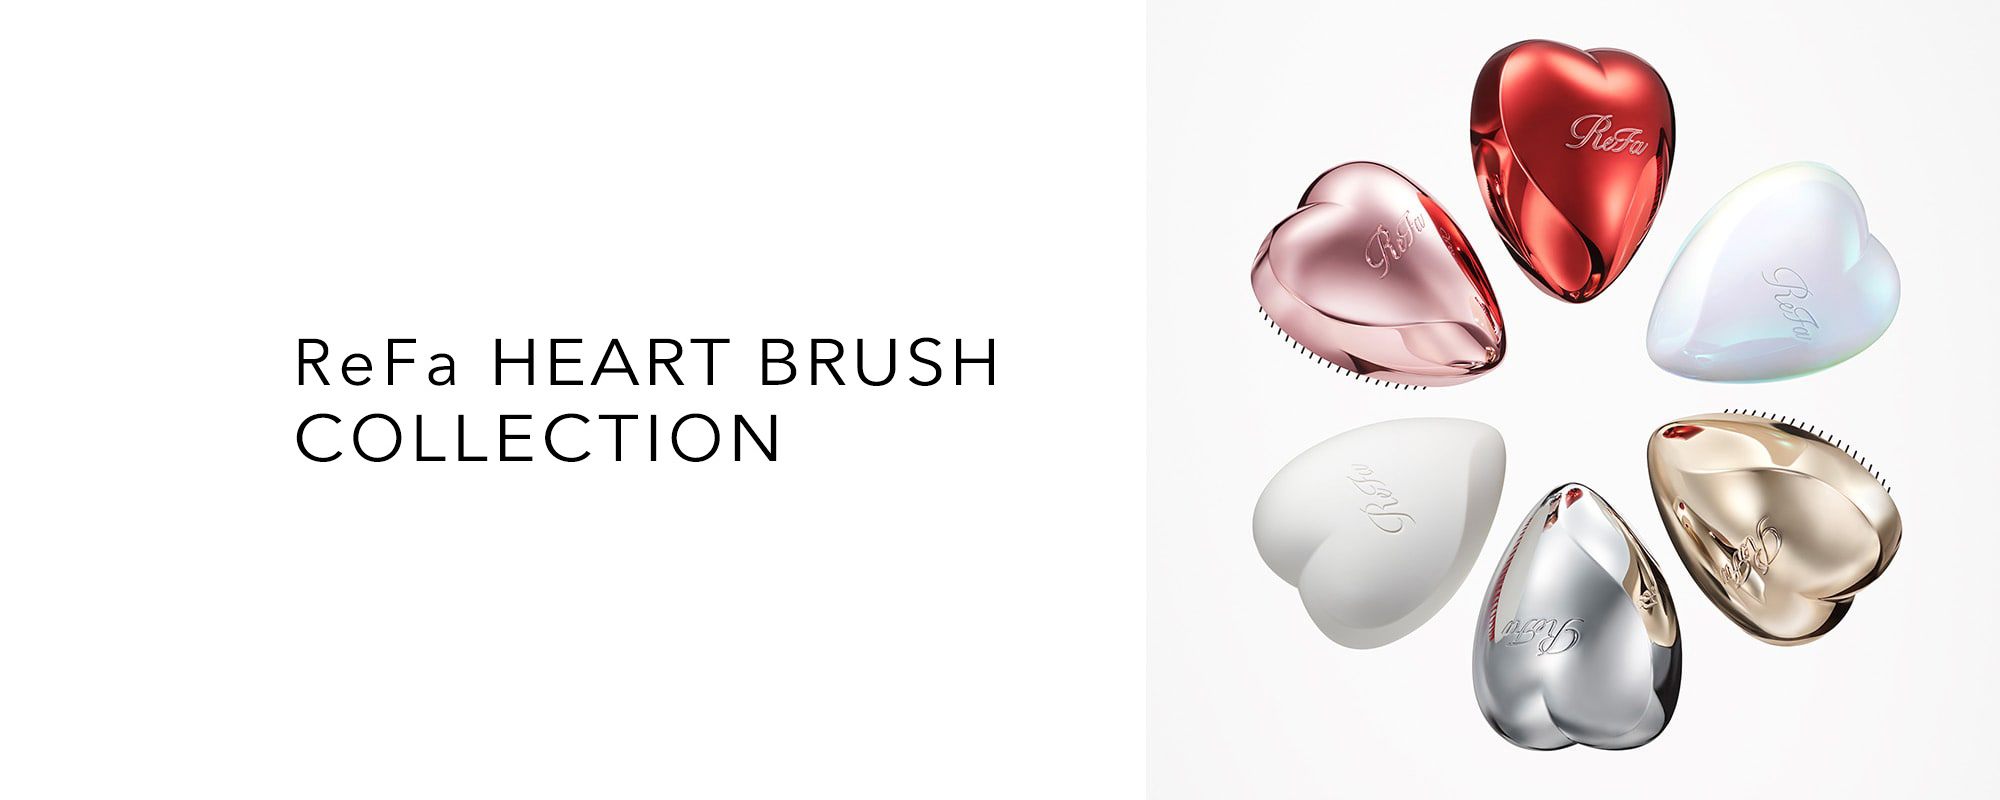 ReFa HEART BRUSH COLLECTION